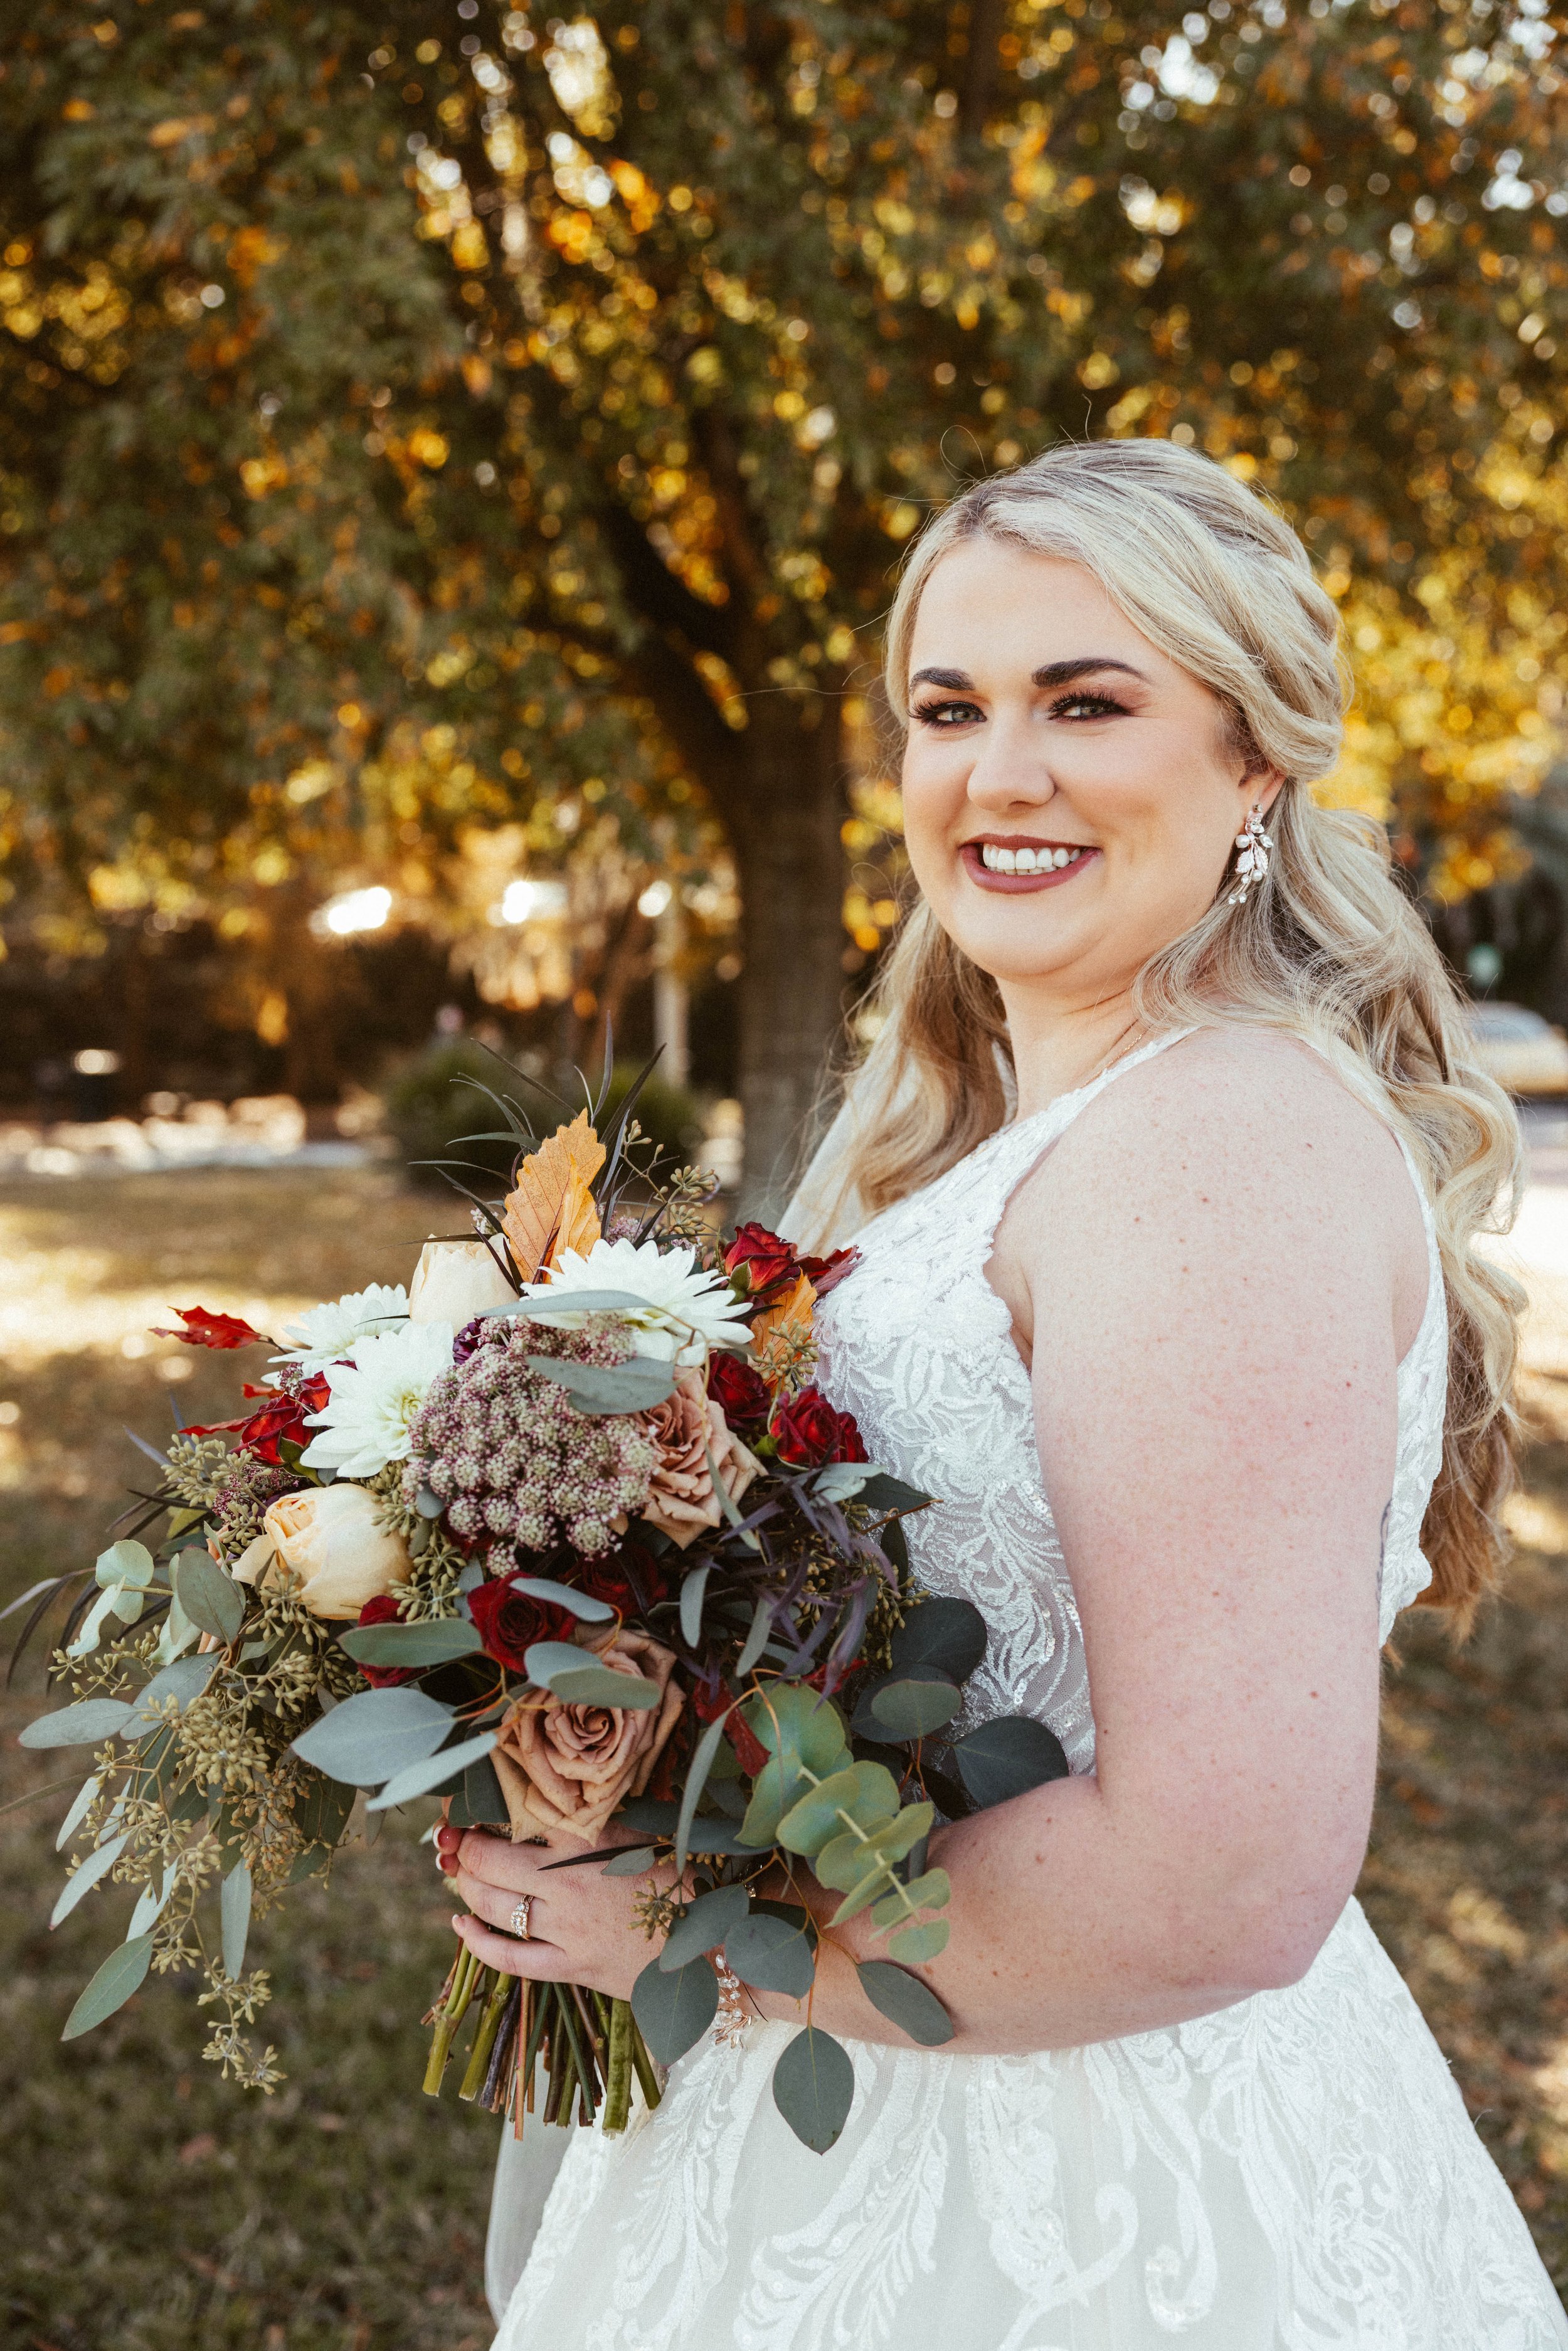 Ivory-and-beau-bride-ansley-bought-sparkly-and-traditional-highneck-ballgown-at-savannah-bridal-shop-gets-married-at-cathedral-with-the-help-of-ivory-and-beau-who-created-floral-peices-for-the-ceremony-and-reception-in-their-savannah-florwer-shop-35.jpg